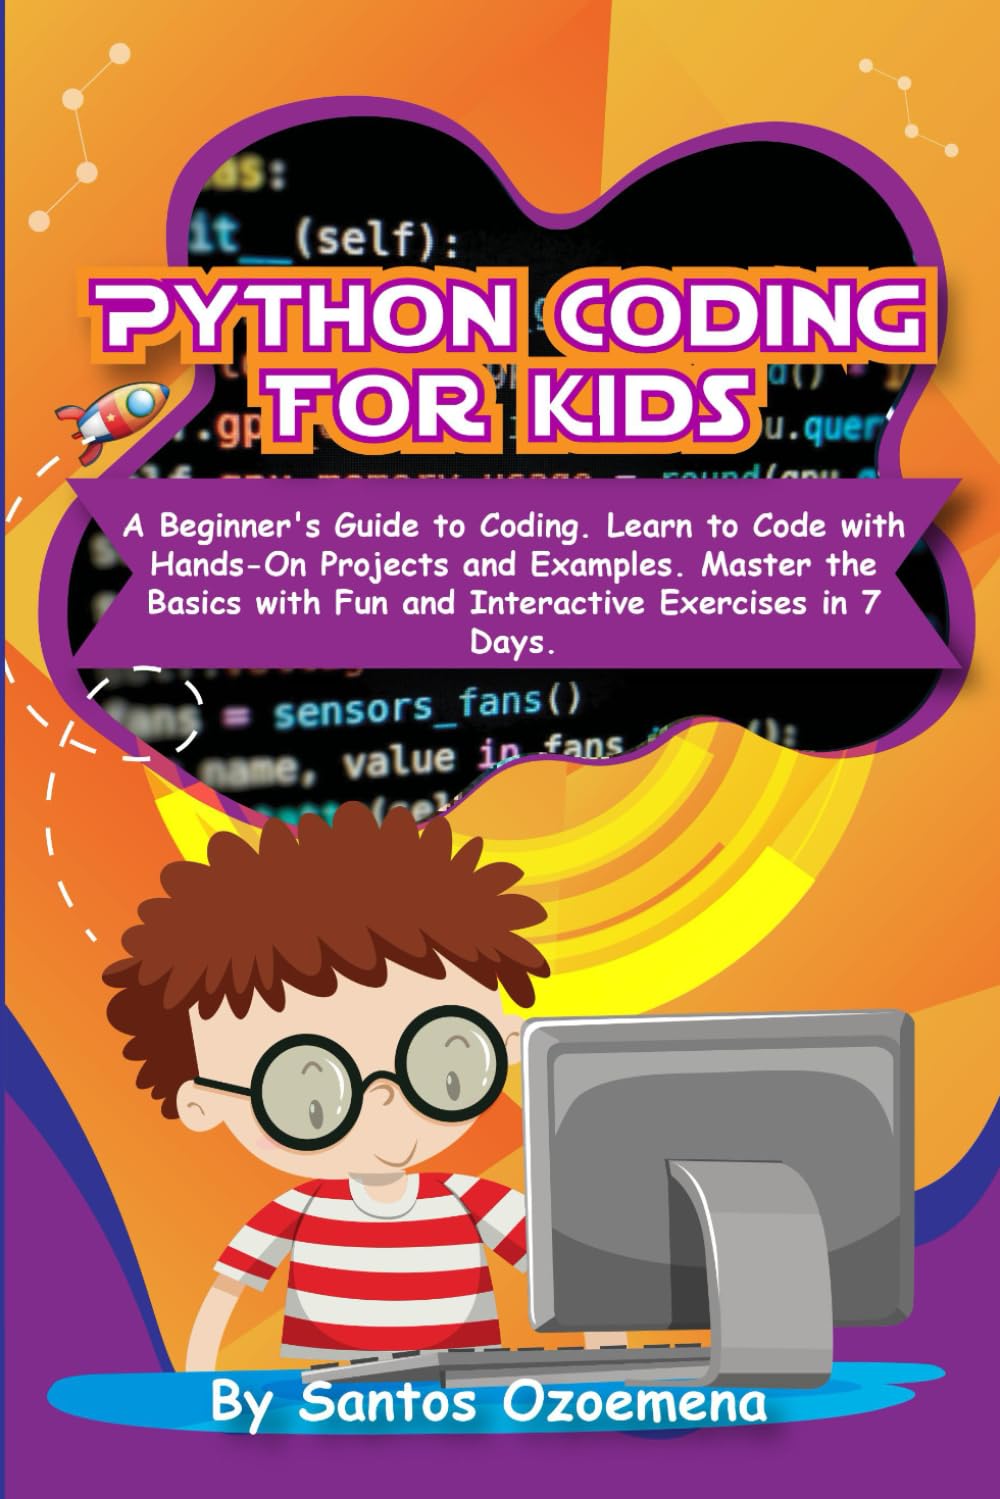 Python Coding for Kids: A Beginner’s Guide to Coding. Learn to Code with Hands-On Projects and Examples. Master the Basics With Fun and Interactive Exercises in 7 Days